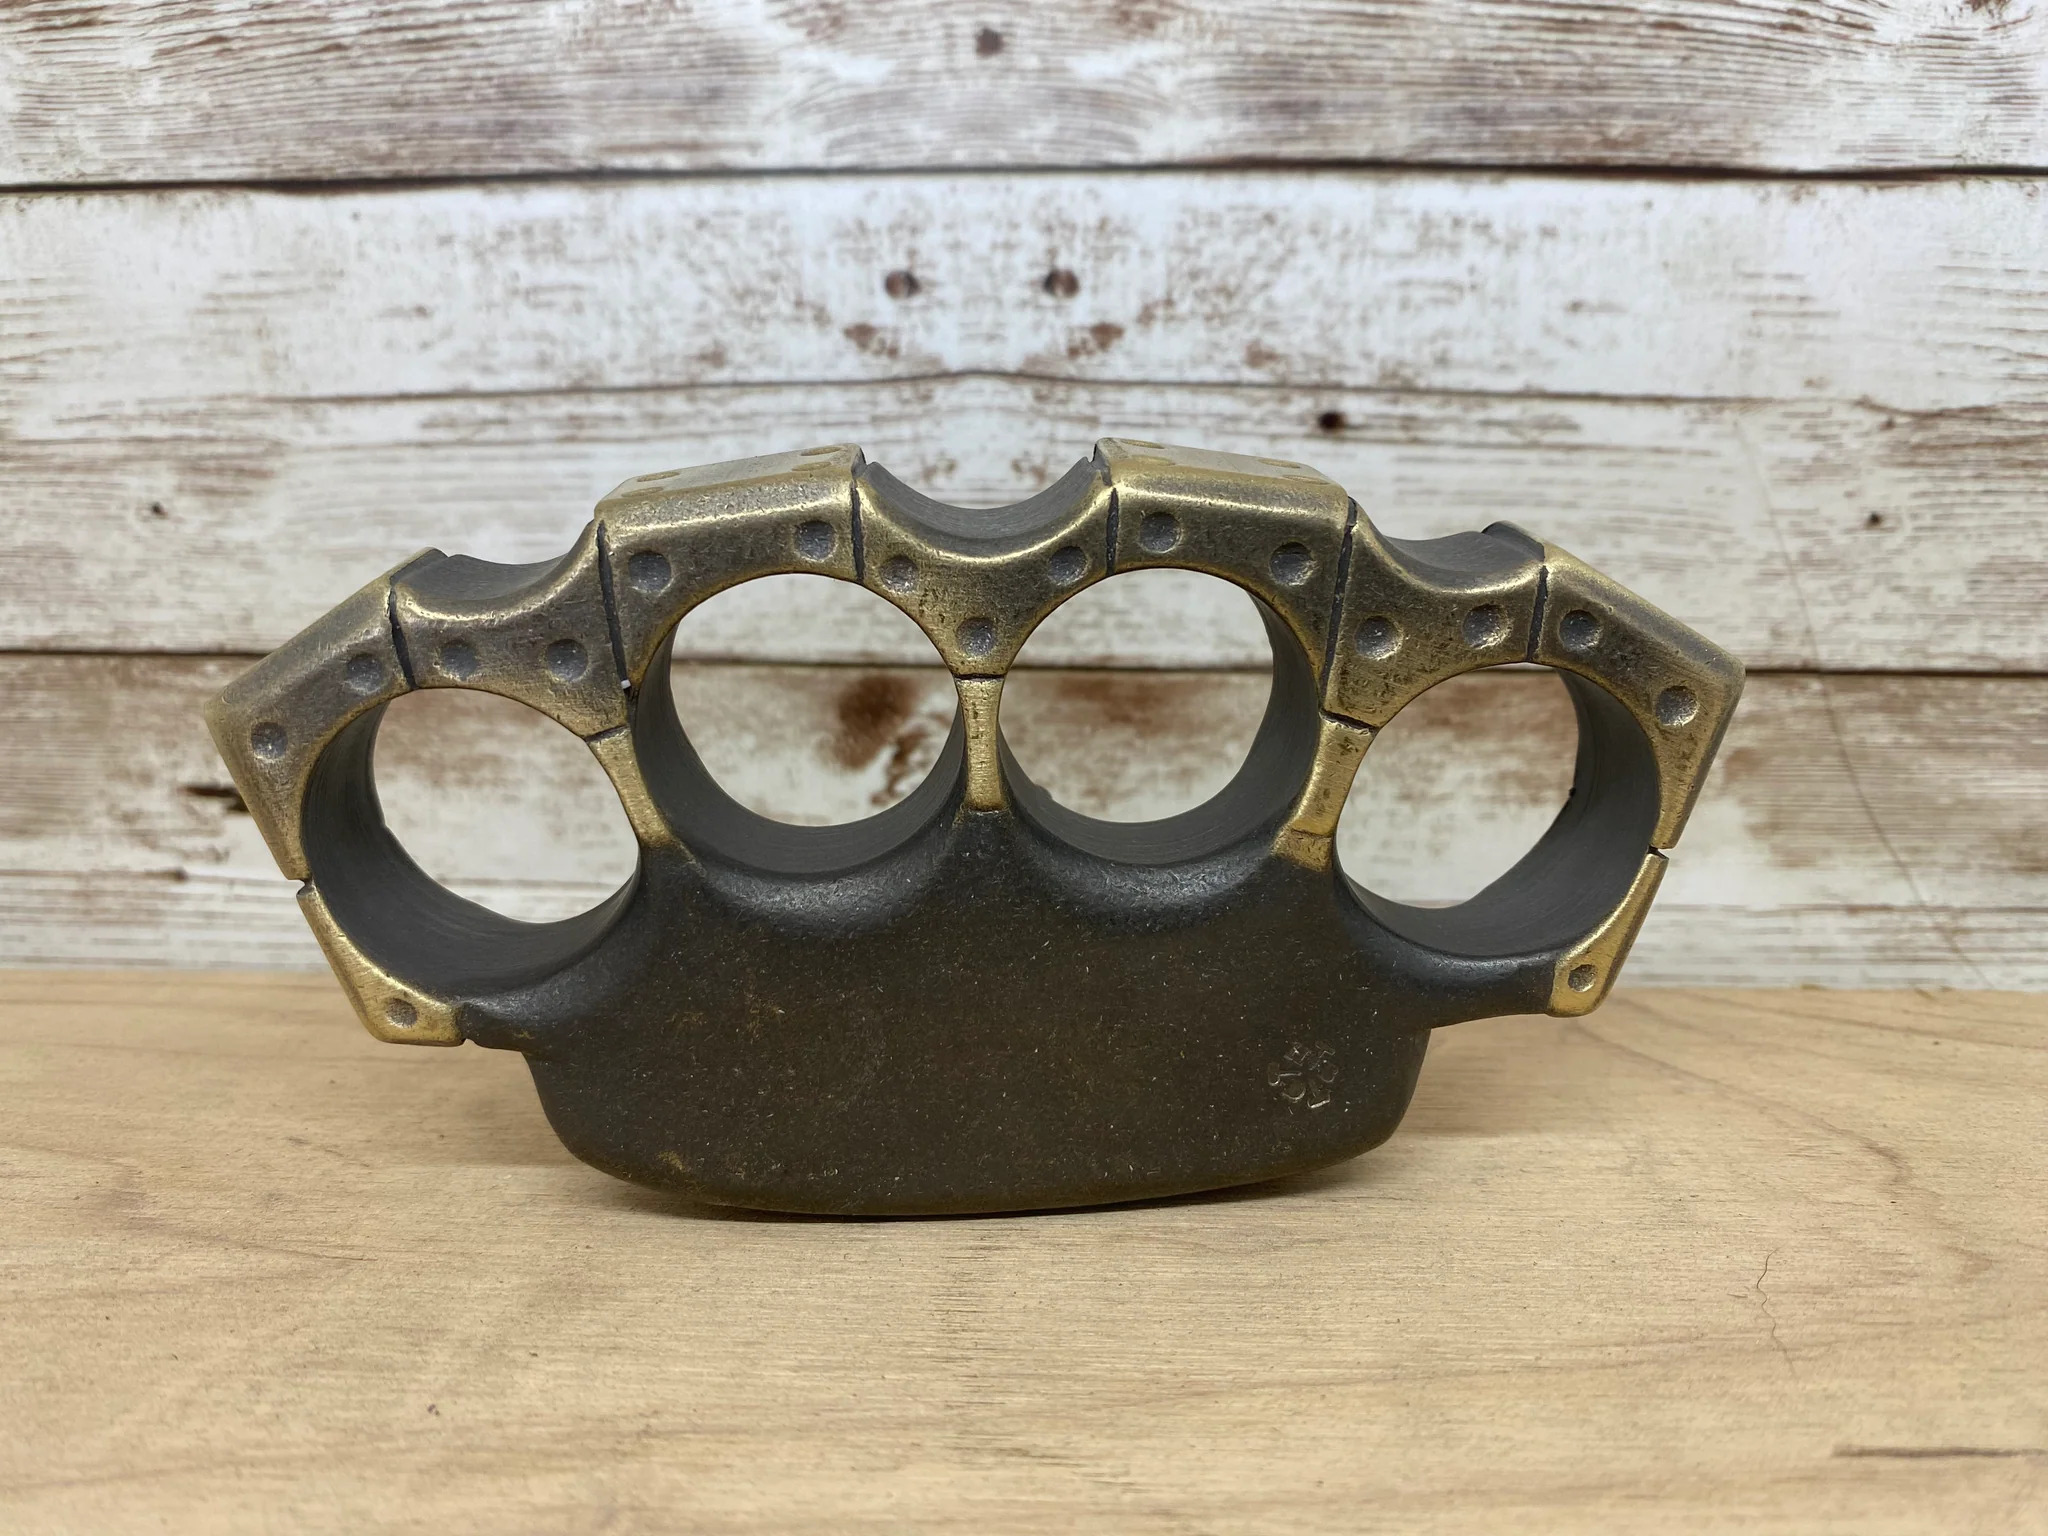 Why are Brass Knuckles Associated with Gangsters and Street